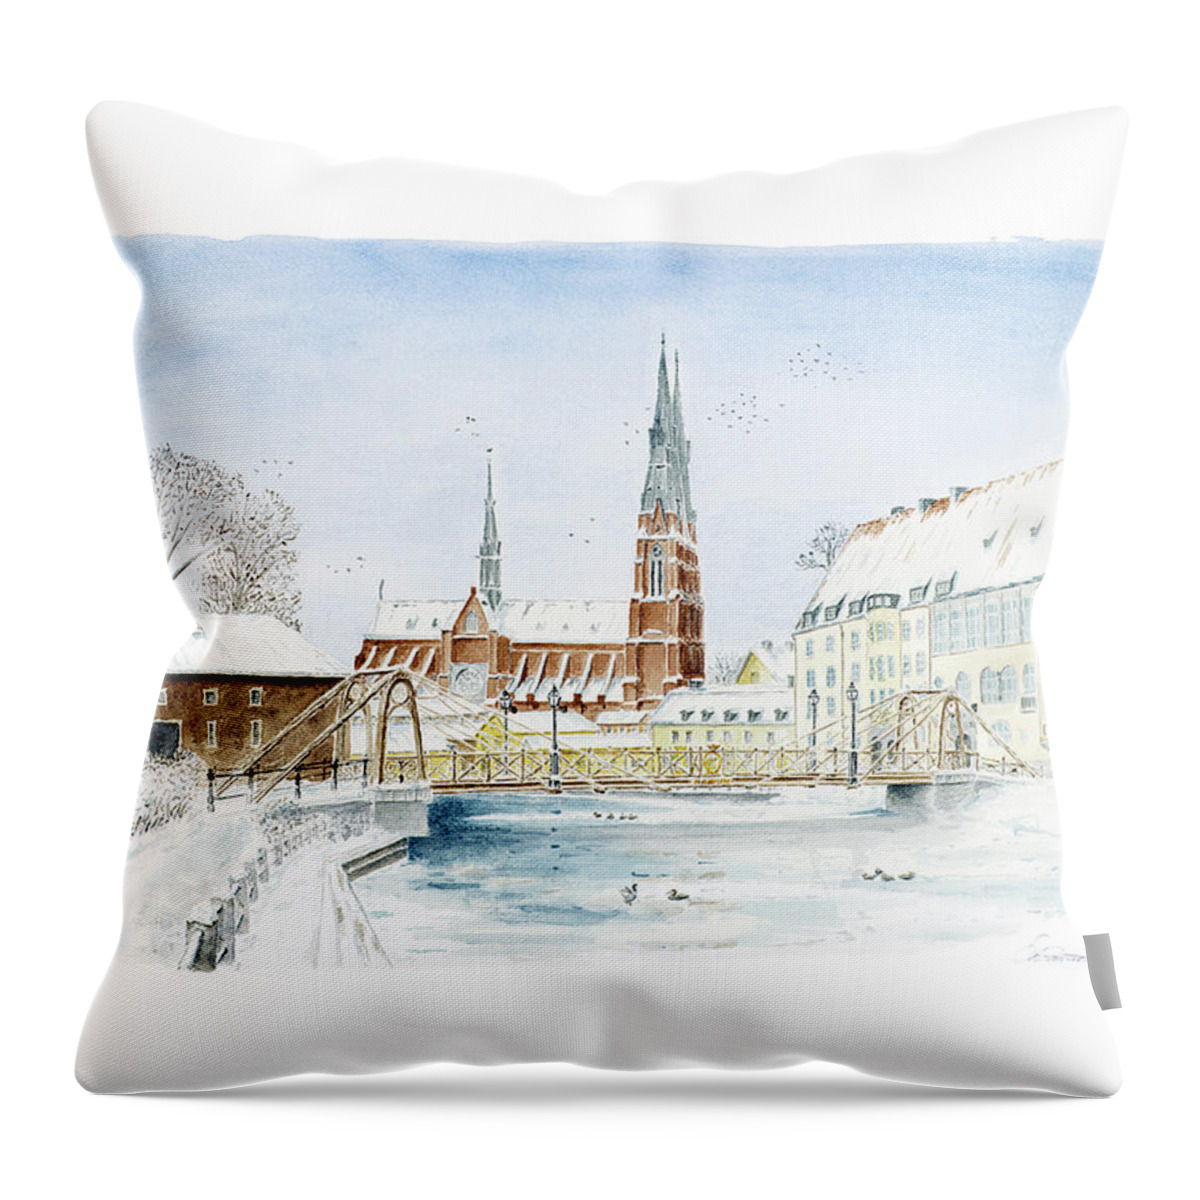 Fyris_river Throw Pillow featuring the painting The Iron Bridge by Torbjorn Swenelius